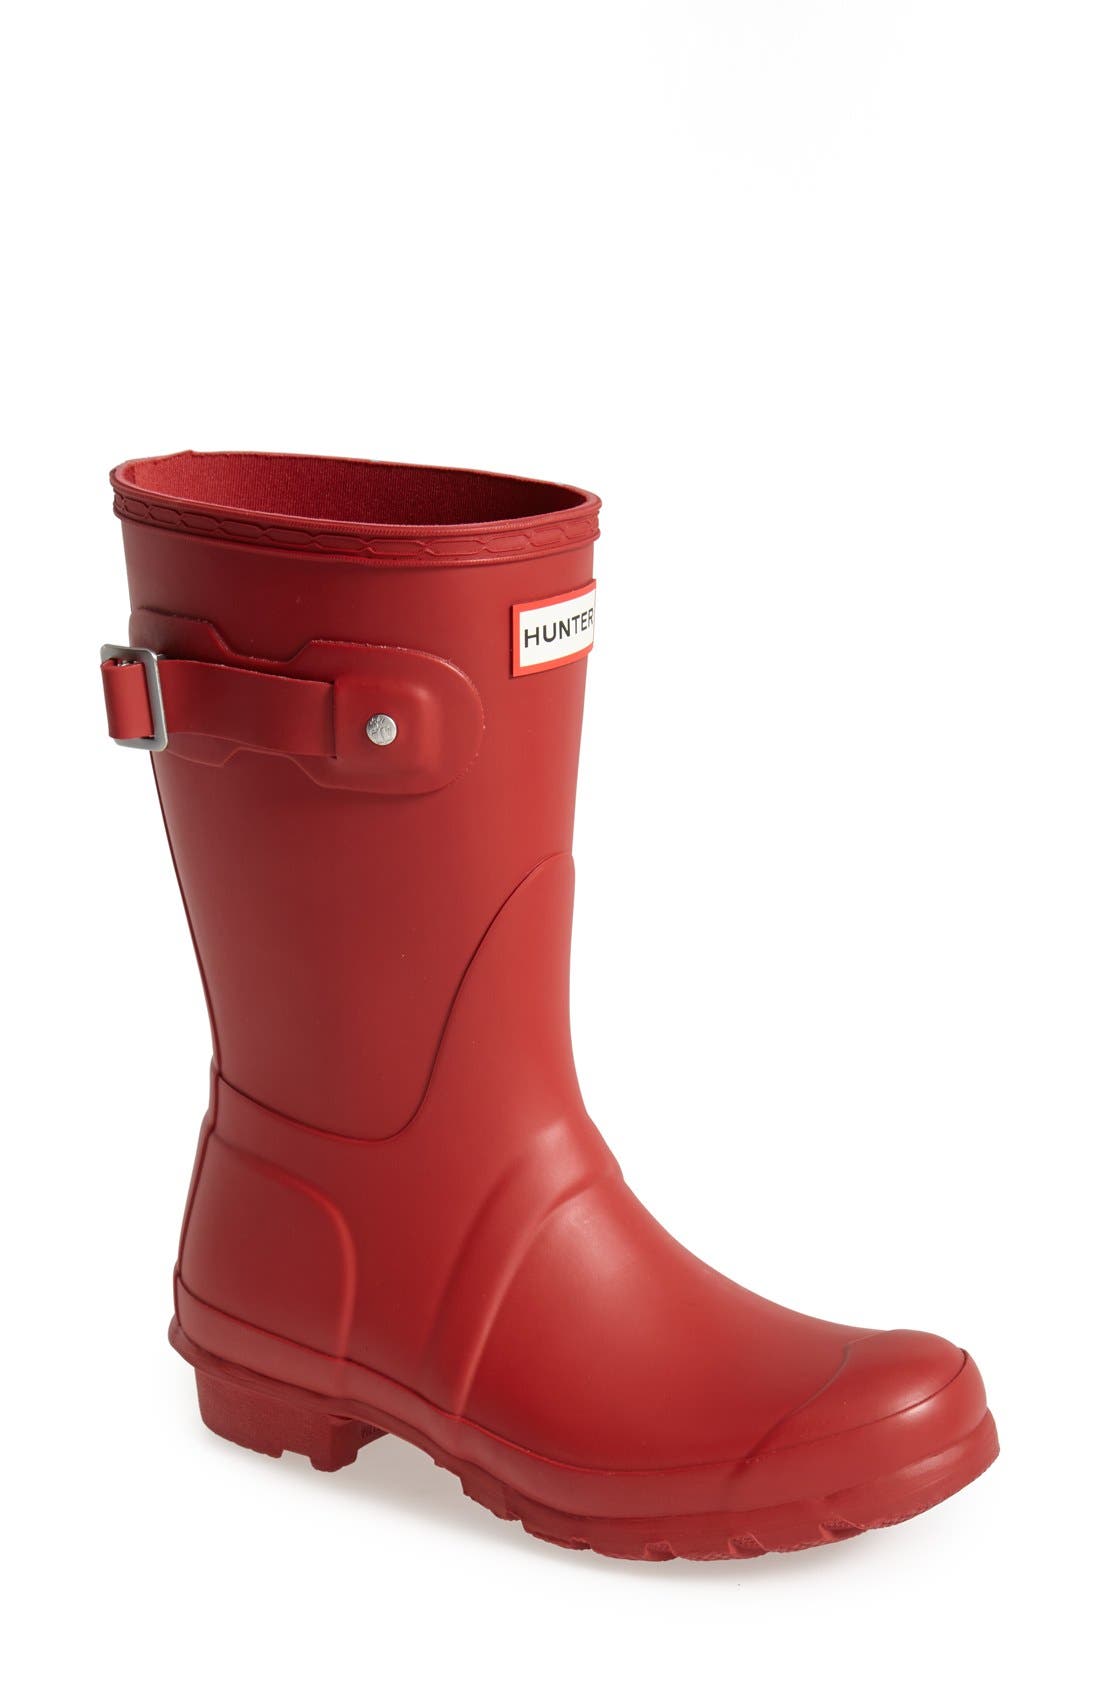 Women's Red Mid-Calf Boots | Nordstrom